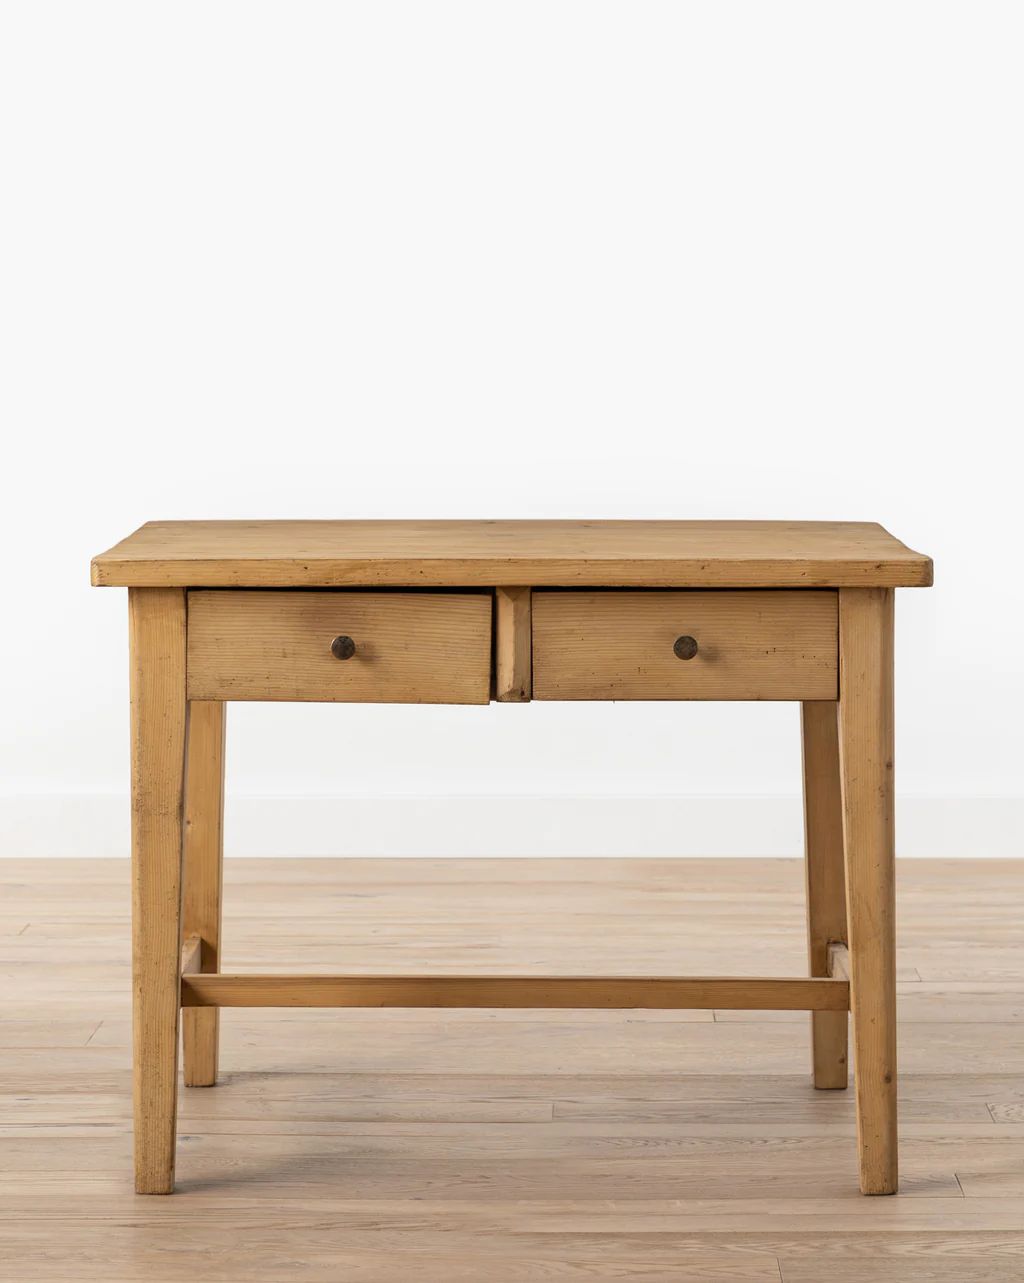 Vintage Pine Table with Two Drawers | McGee & Co.